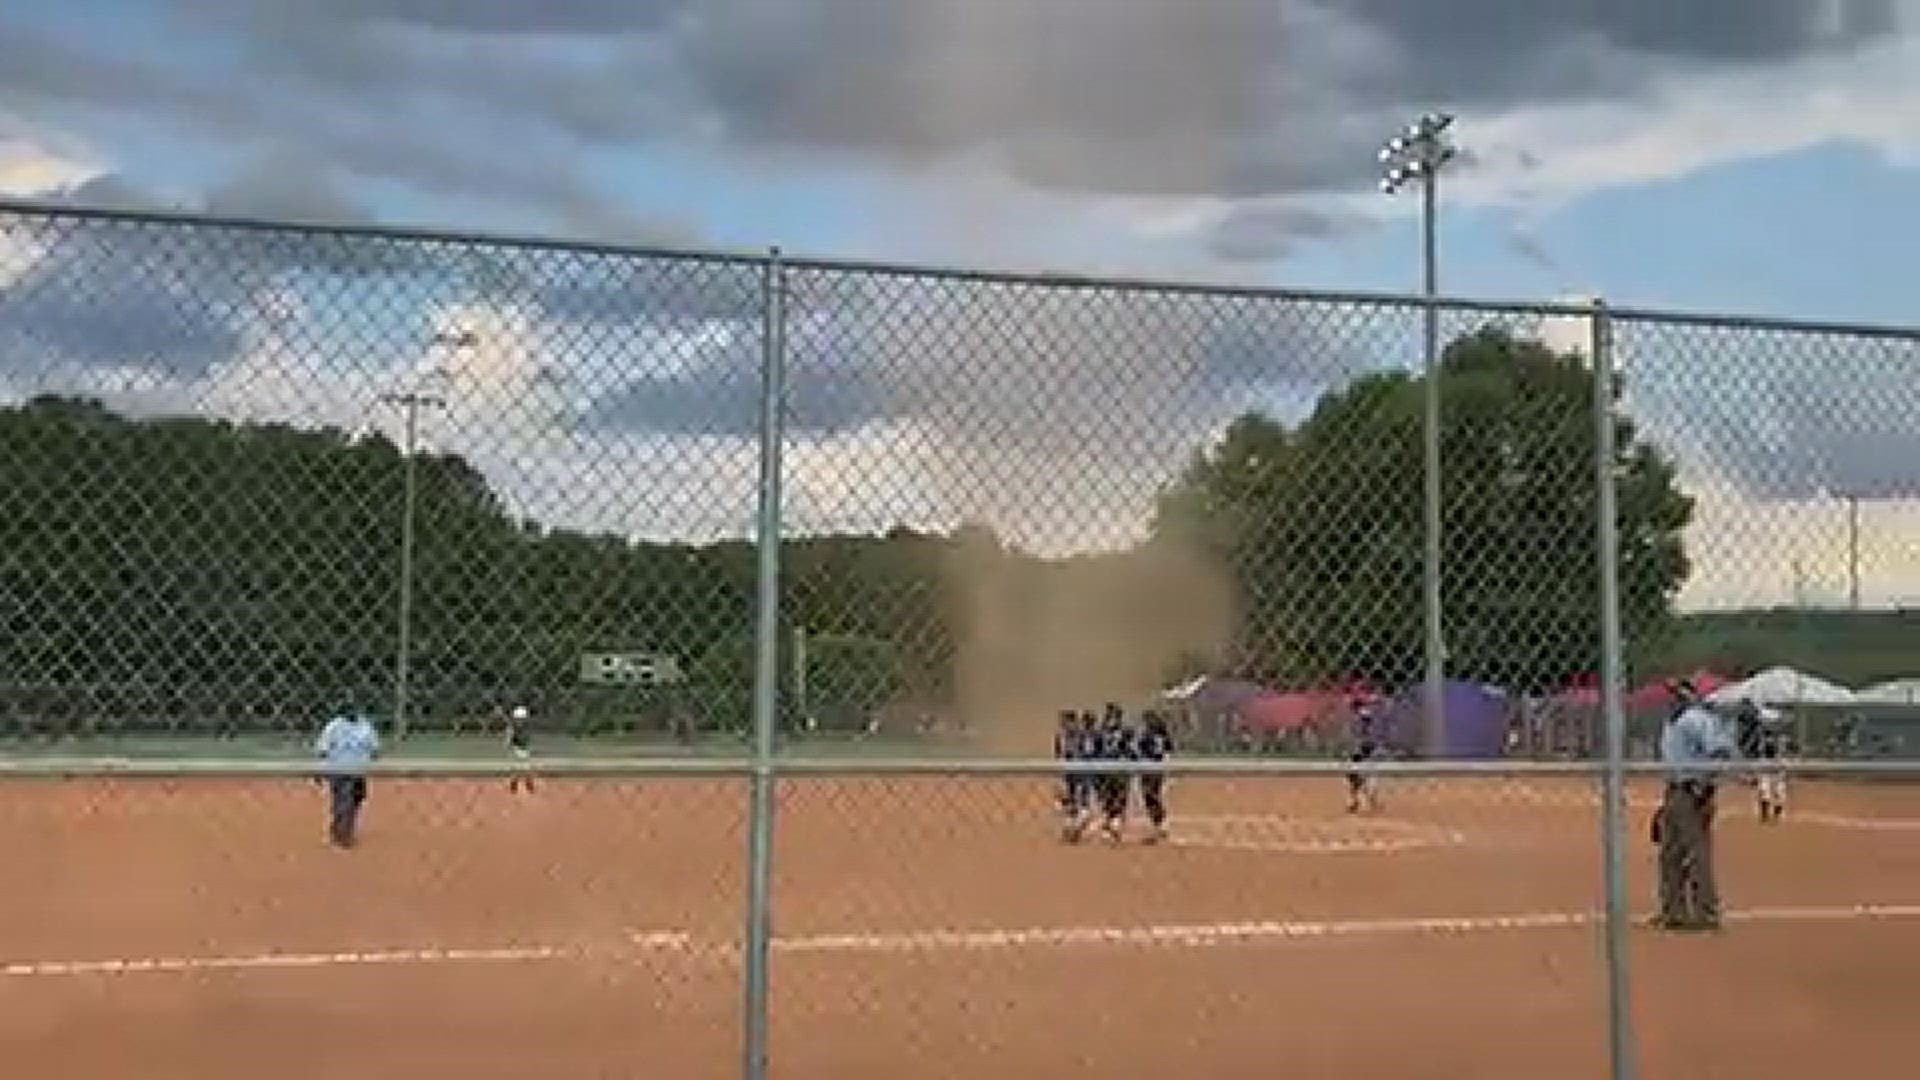 Two innings after the first dust devil, this second one was caught on cam in Marietta Saturday.